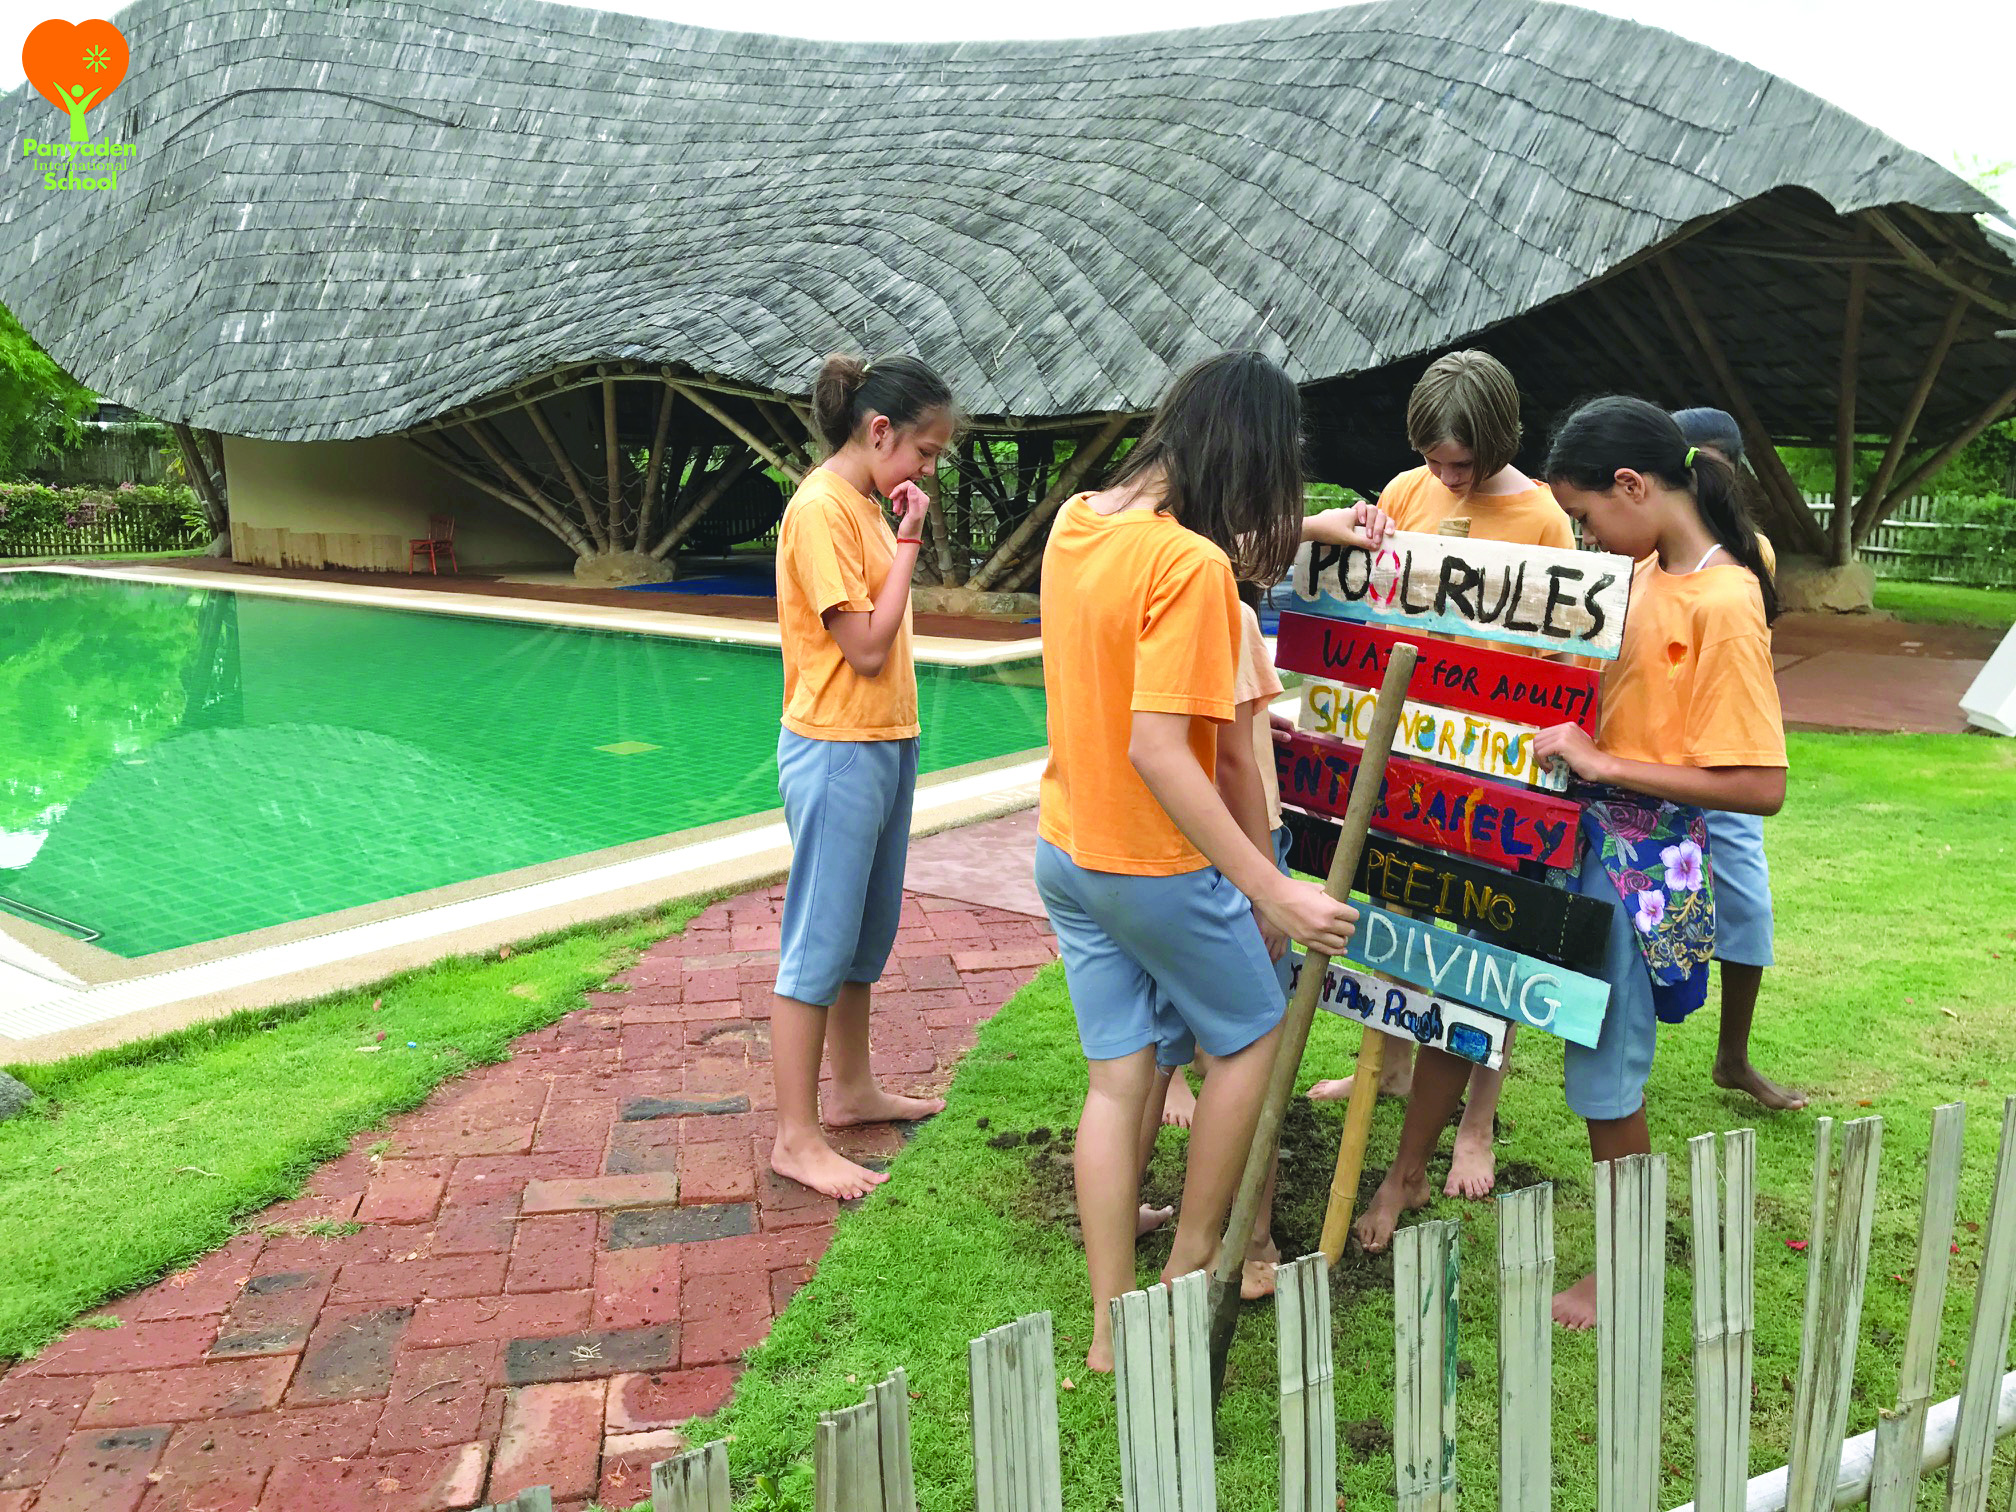 Panyaden Year 6/7 students putting up the wooden swimming pool rules signboards they made